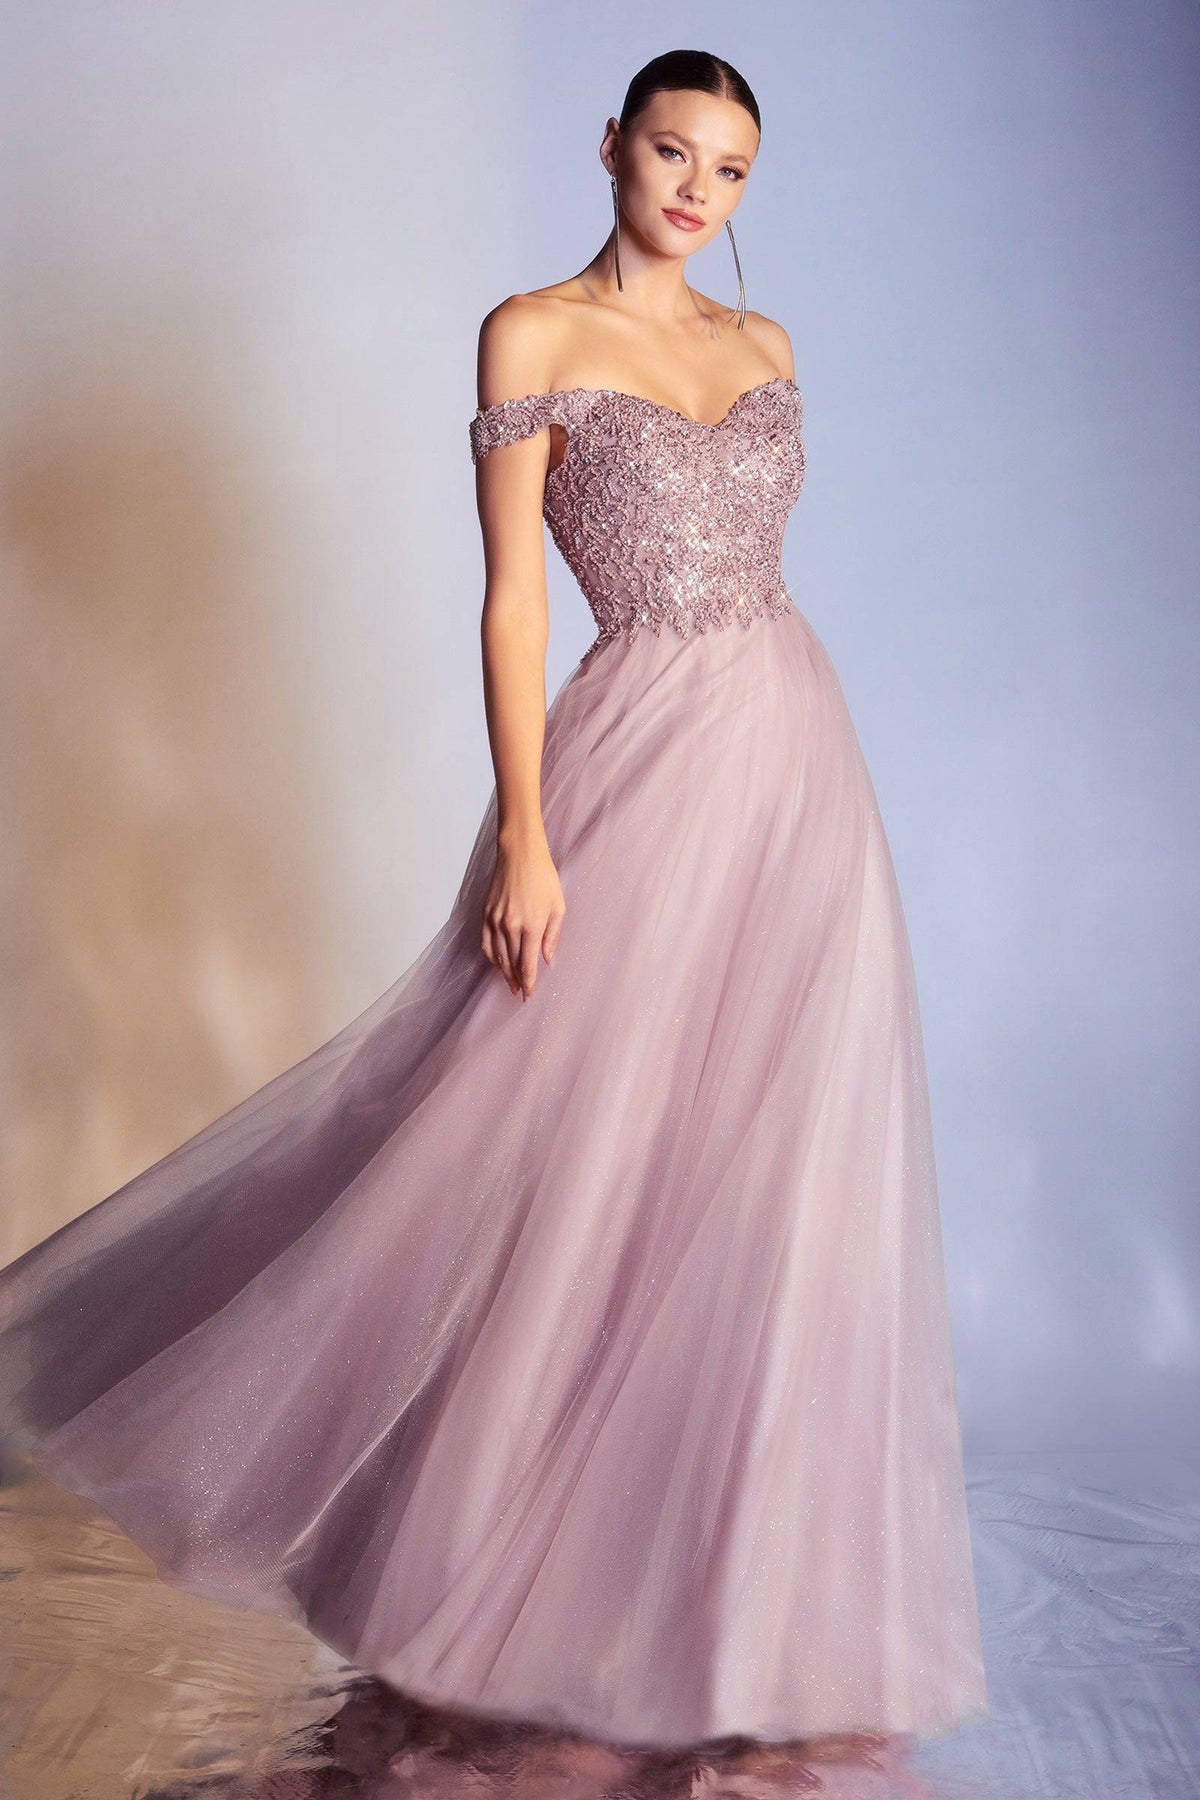 Jawdropping Princess Ball Gown with Glitter Bodice and Layered Skirt #CDCD0177 - NORMA REED